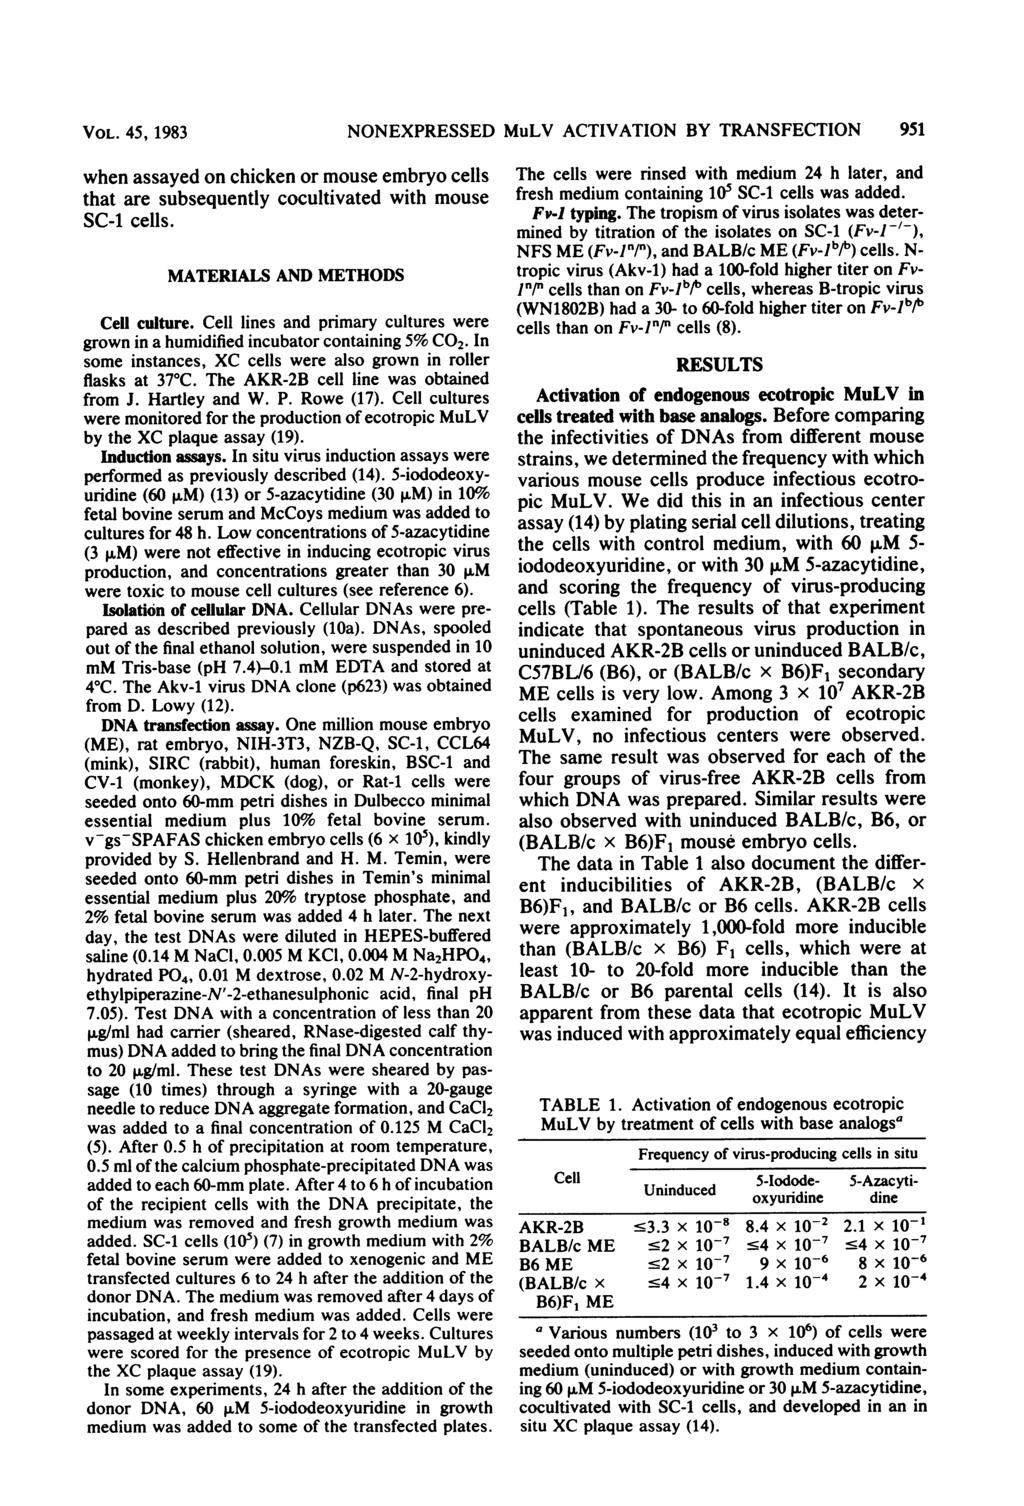 VOL. 45, 1983 when assayed on chicken or mouse embryo cells that are subsequently cocultivated with mouse SC-1 cells. MATERIALS AND METHODS Cell culture.